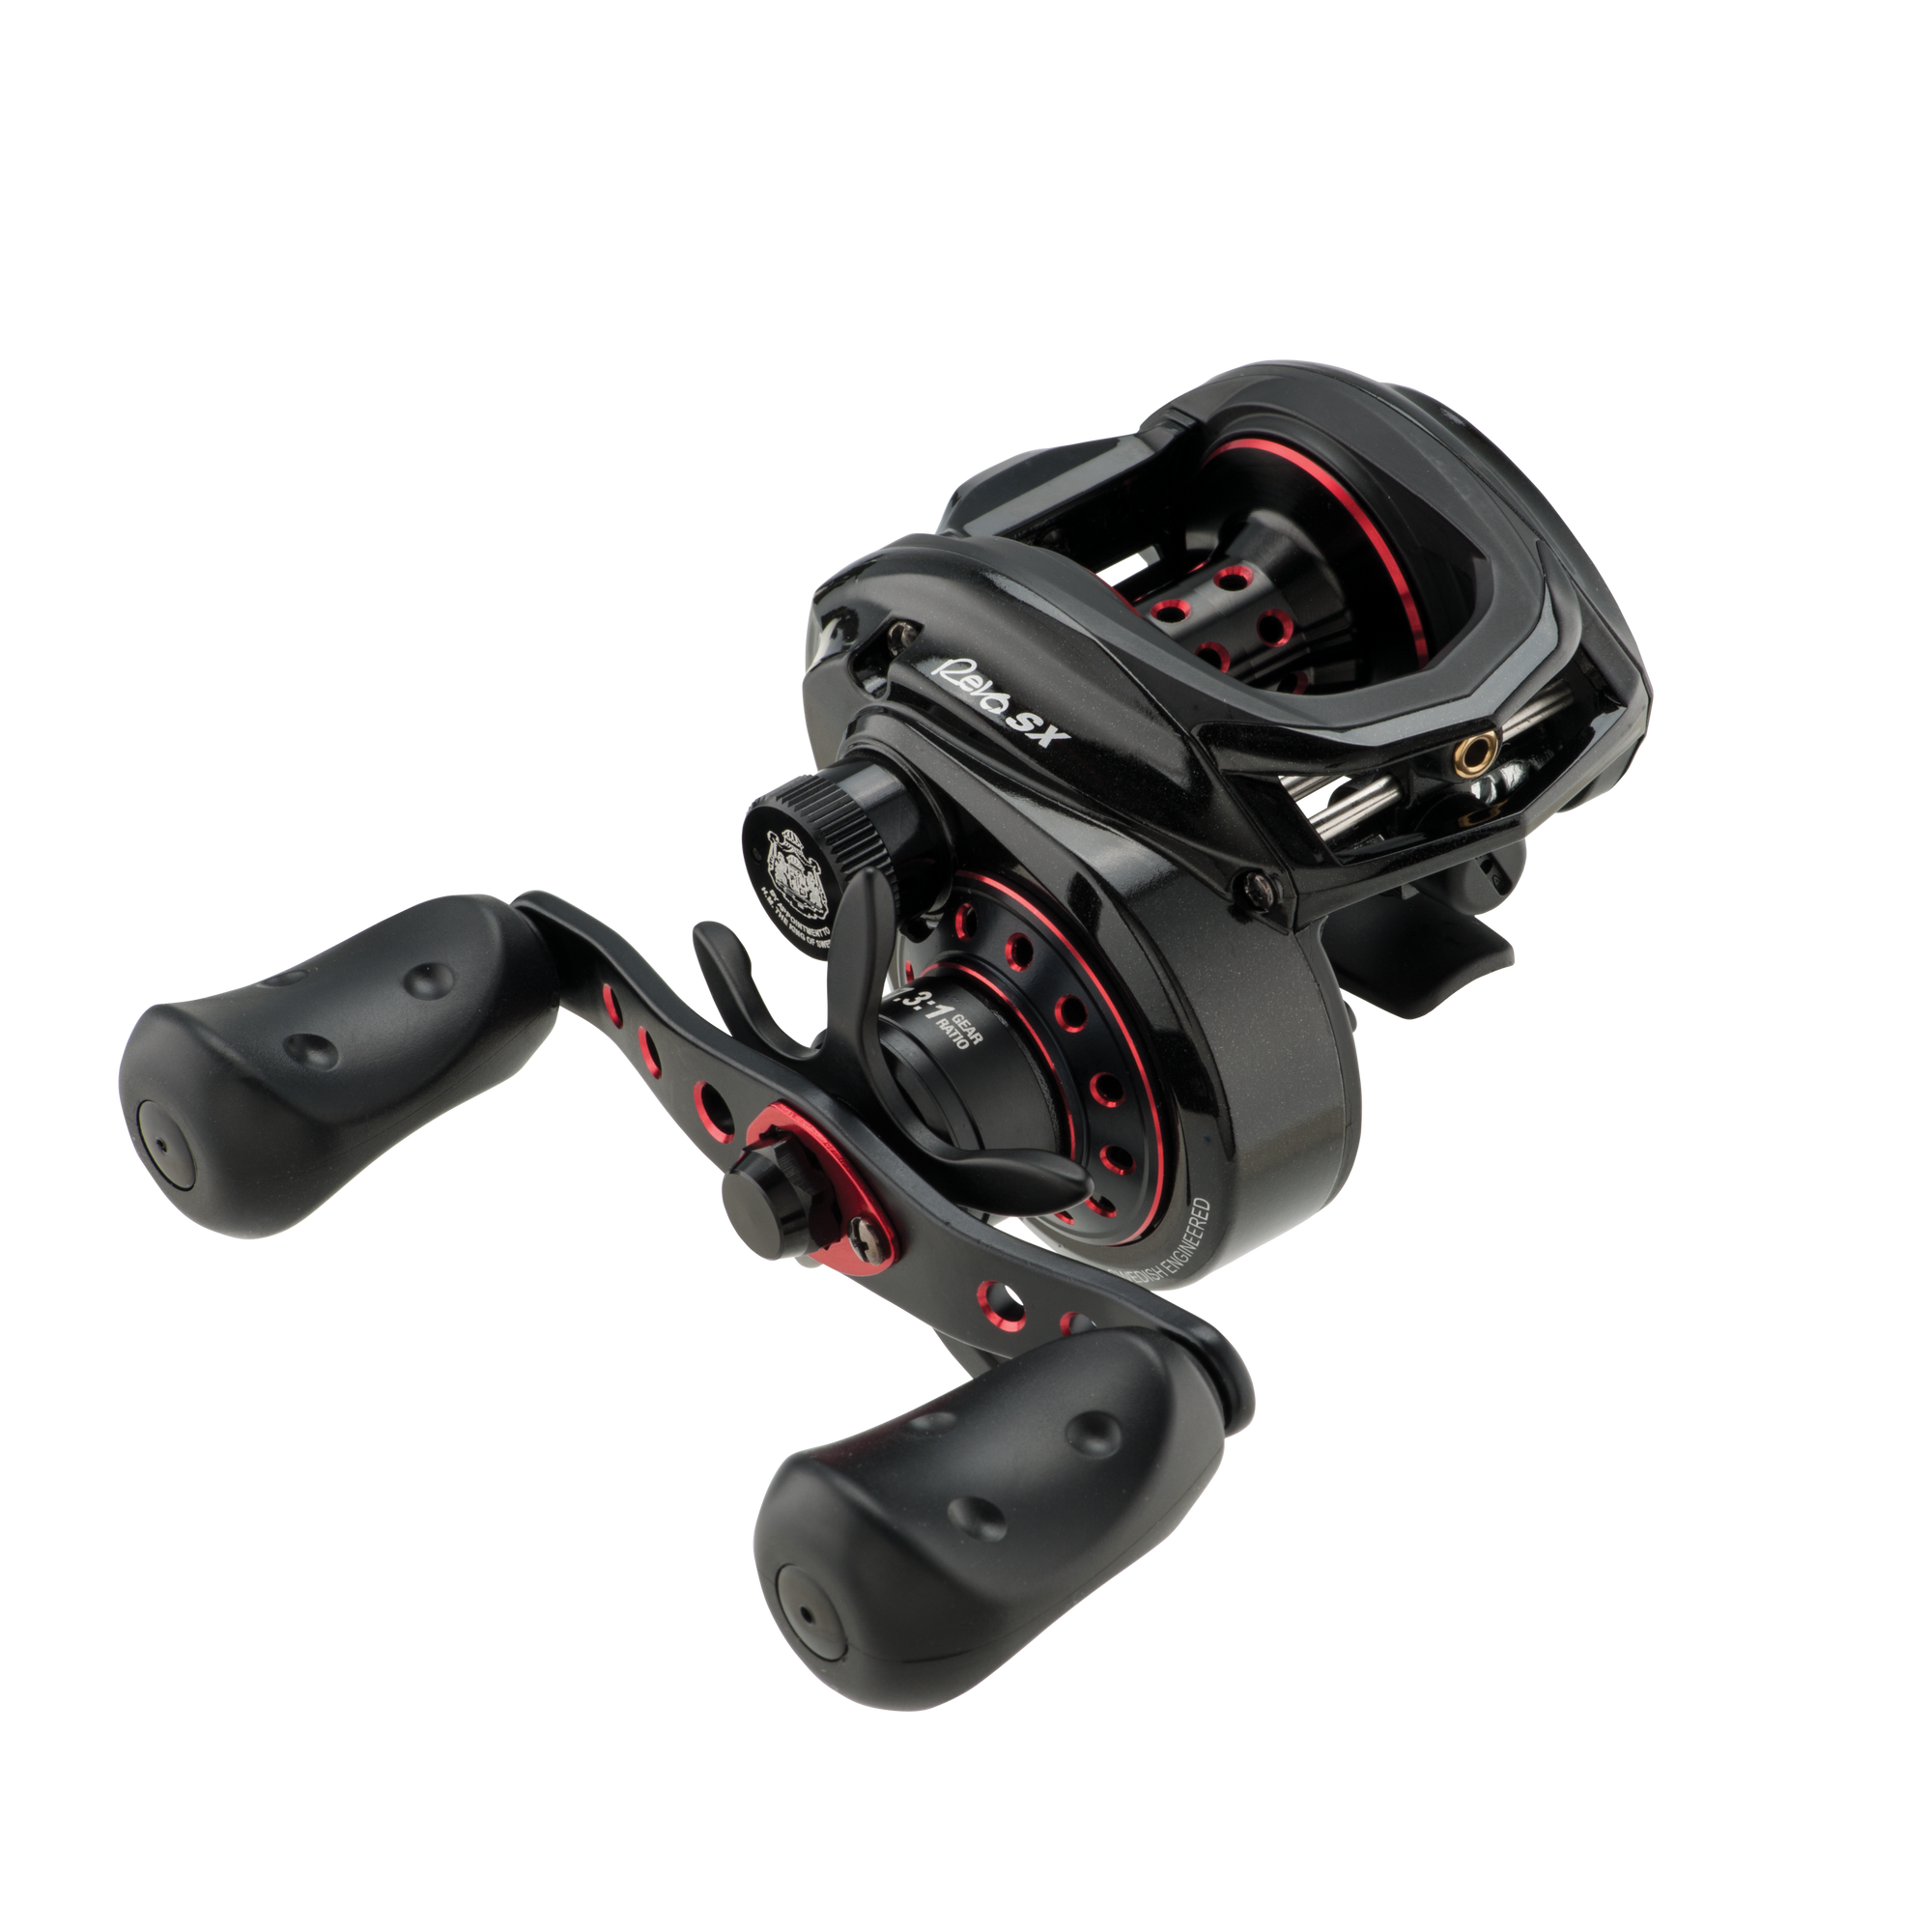 Revo® SX Low Profile Reel - The Great Outdoors